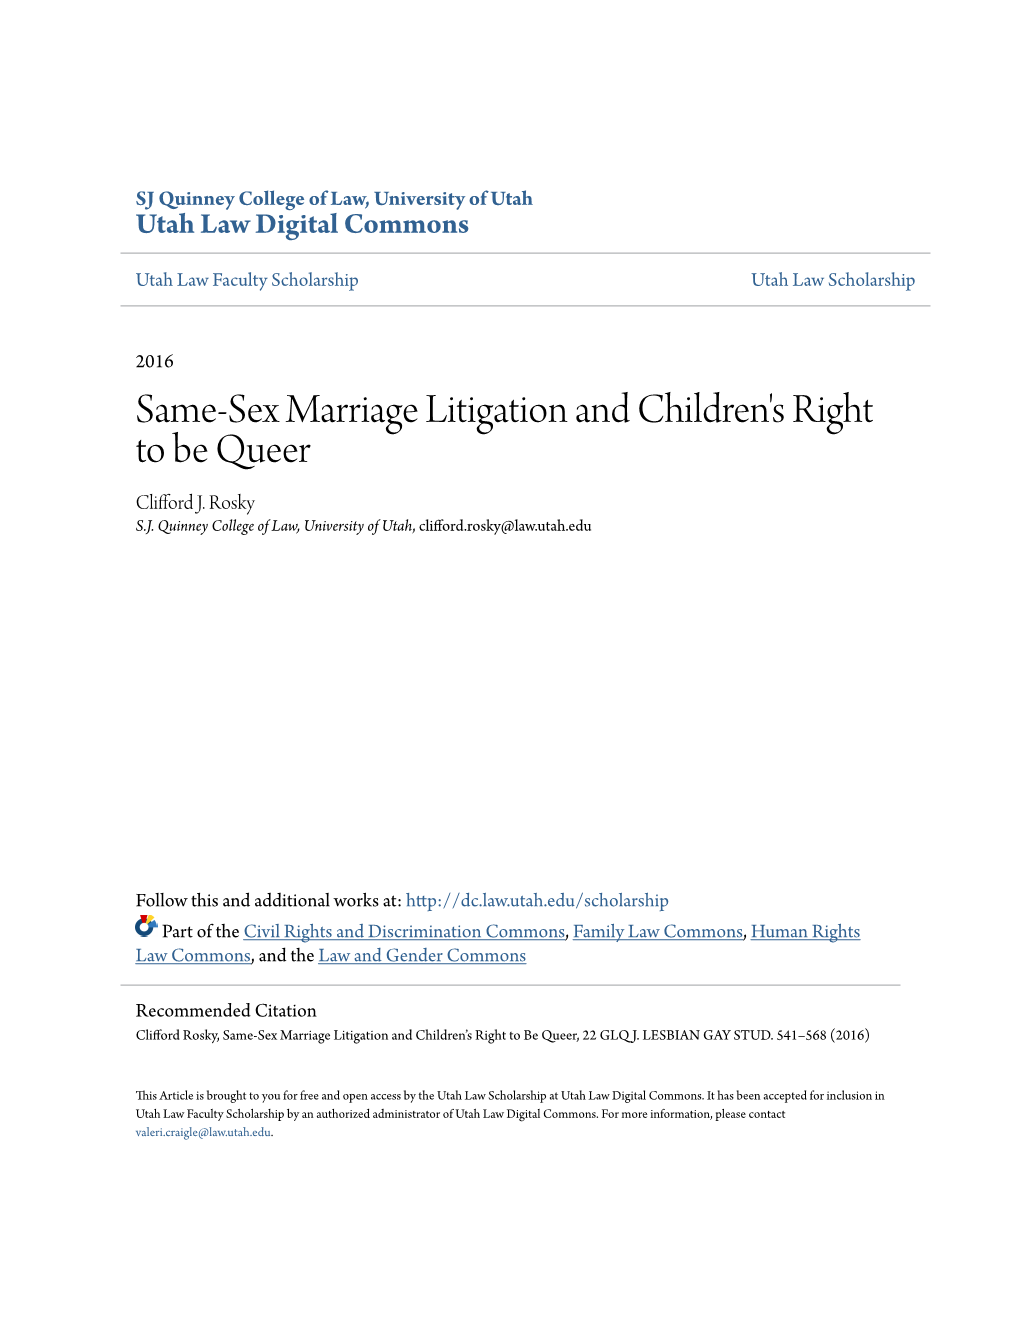 Same-Sex Marriage Litigation and Children's Right to Be Queer Clifford J